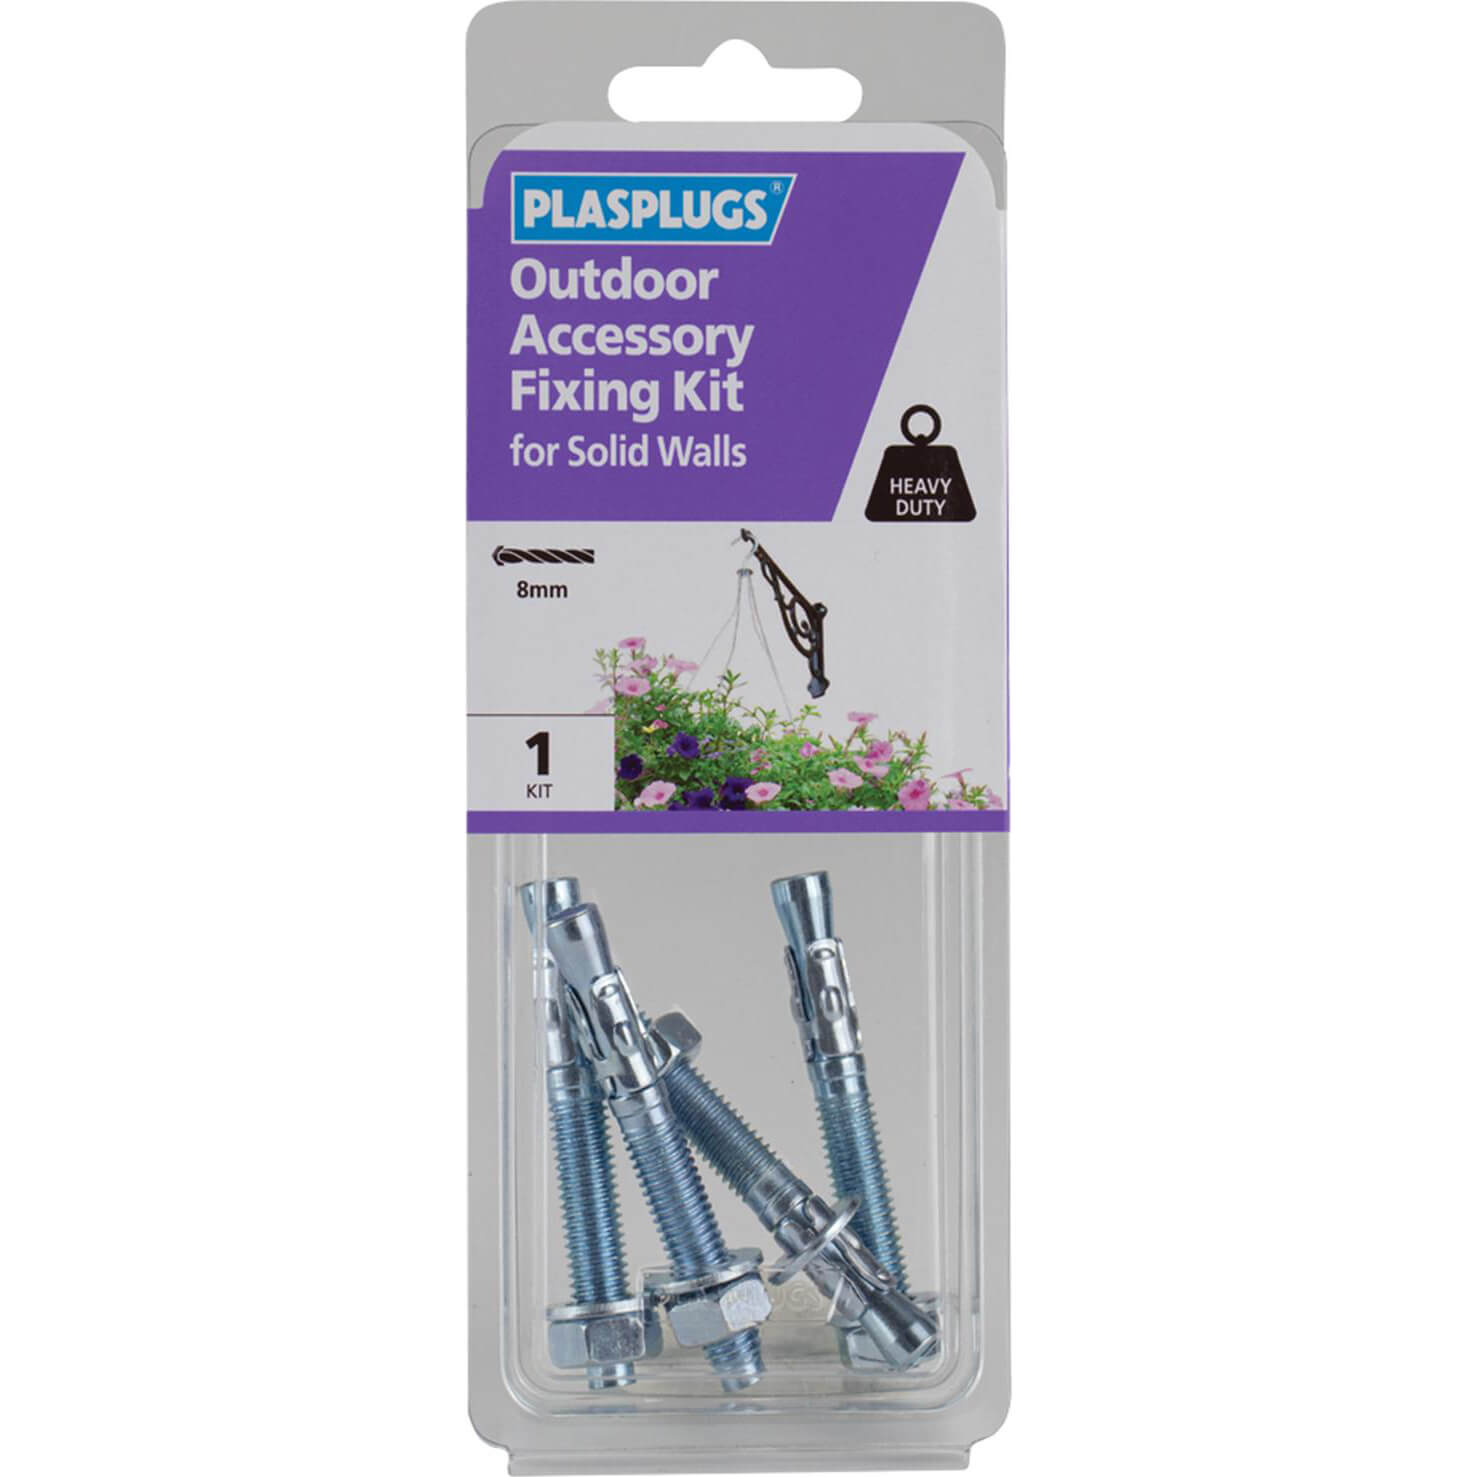 Image of Plasplugs Outdoor Accessory Fixing Kit for Solid Walls